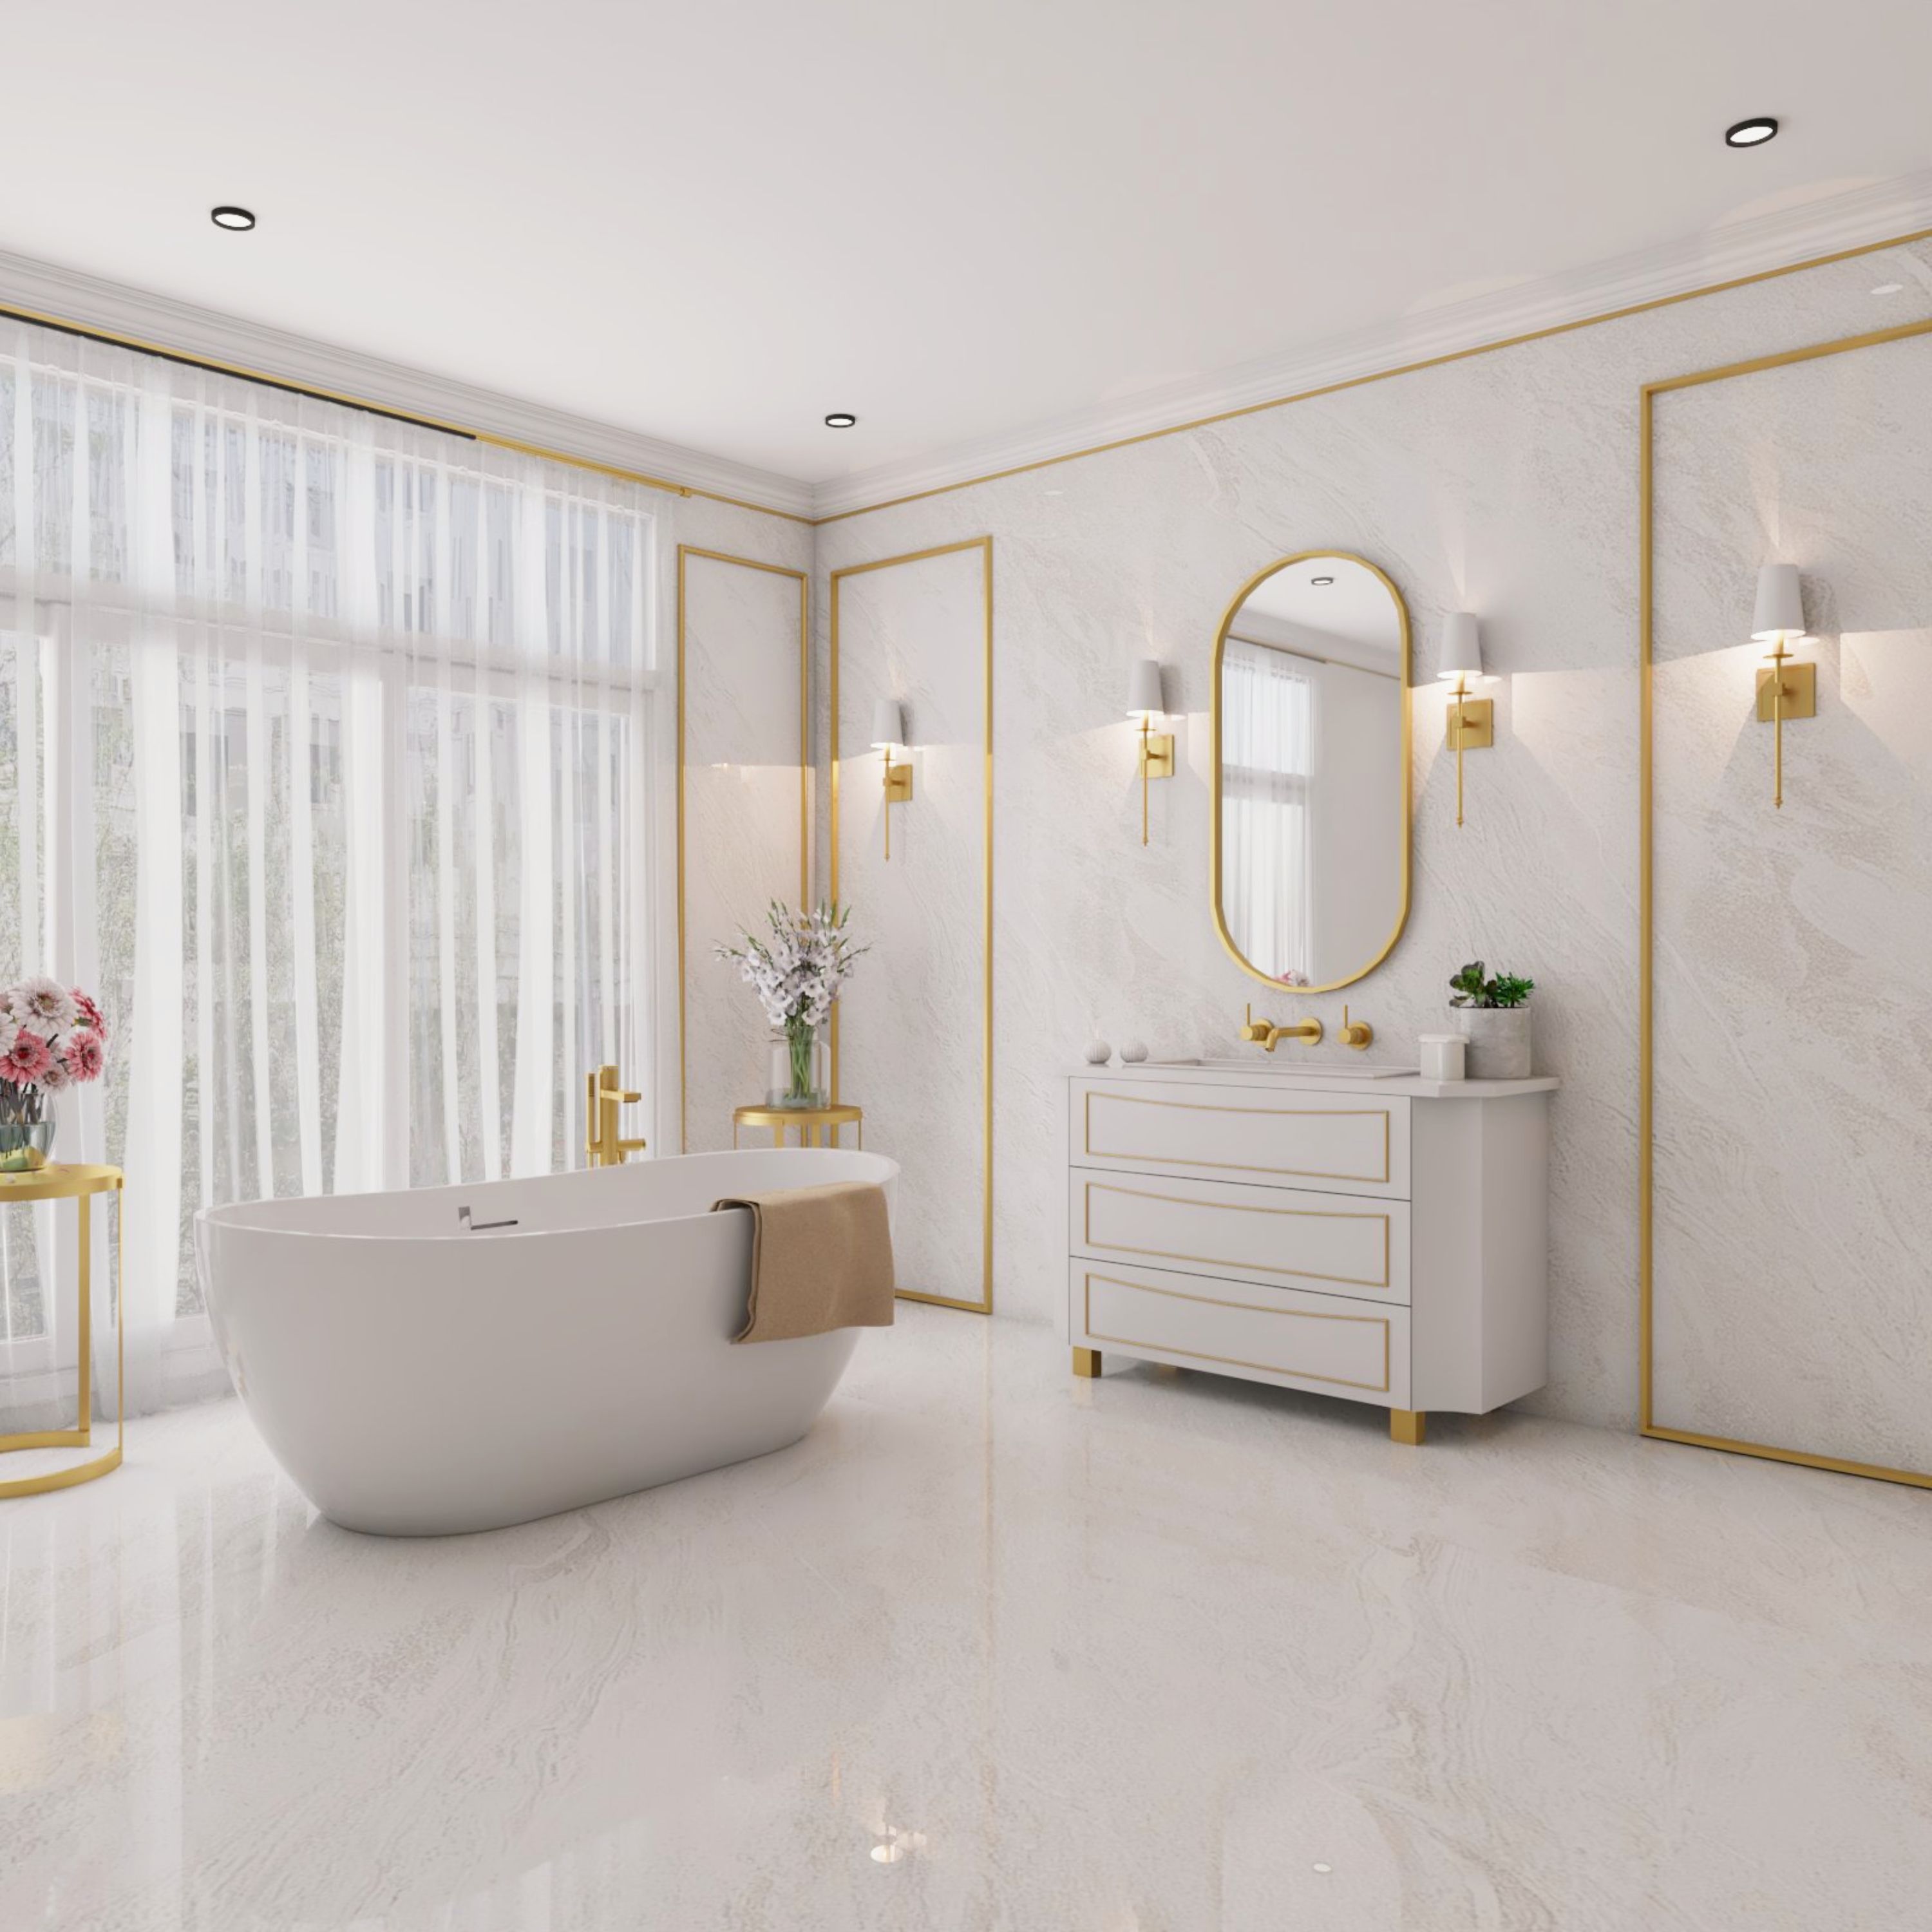 Traditional White Bathroom Design with Floor-Mounted Vanity Unit and Freestanding Bathtub